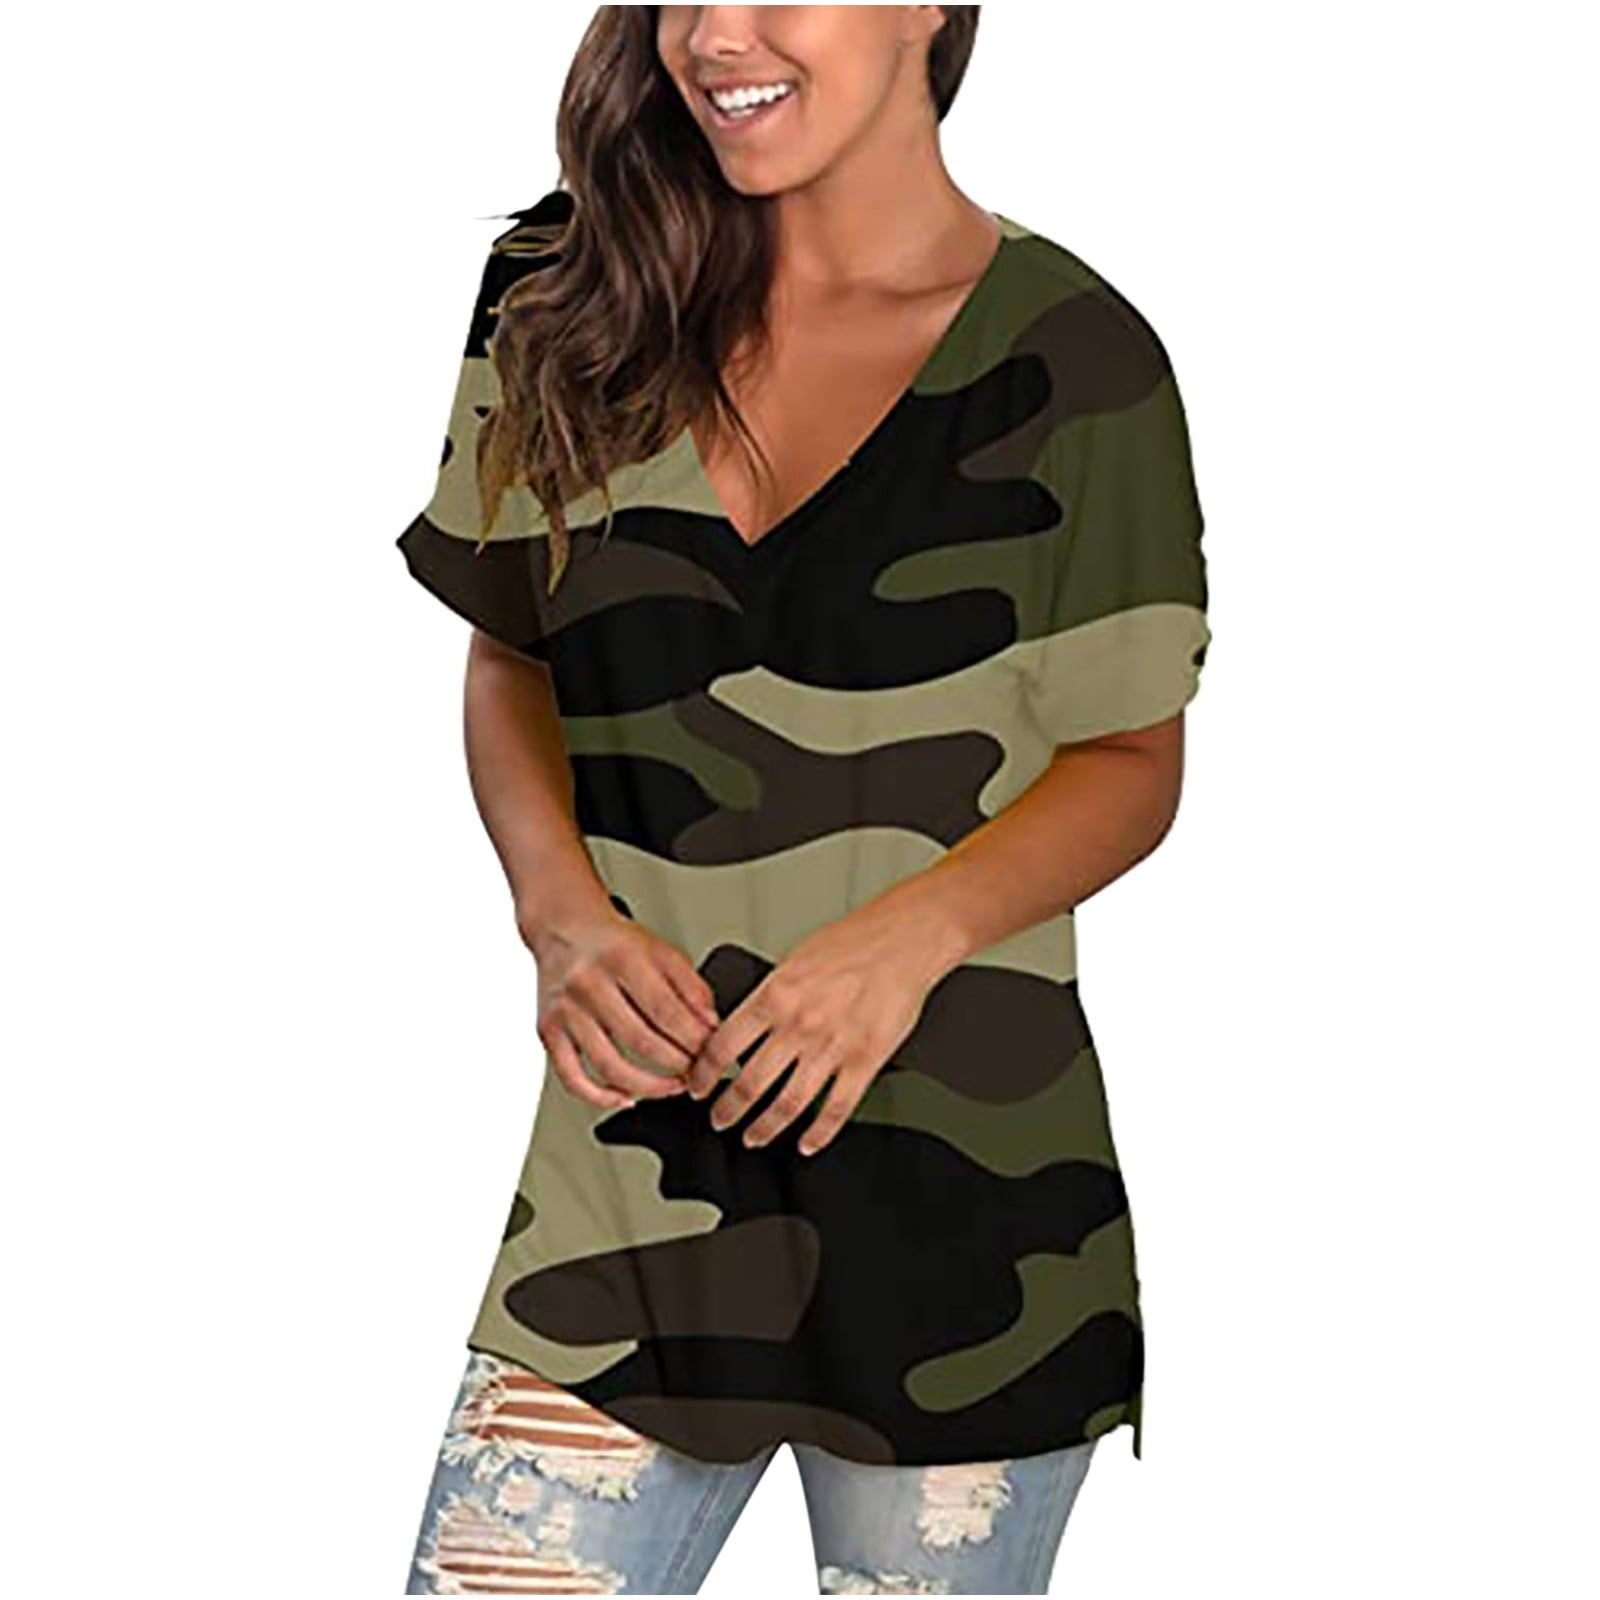 Plus Size Womens Clothing Tops Cold Shoulder Casual Camouflage Tee Shirts Blouse 